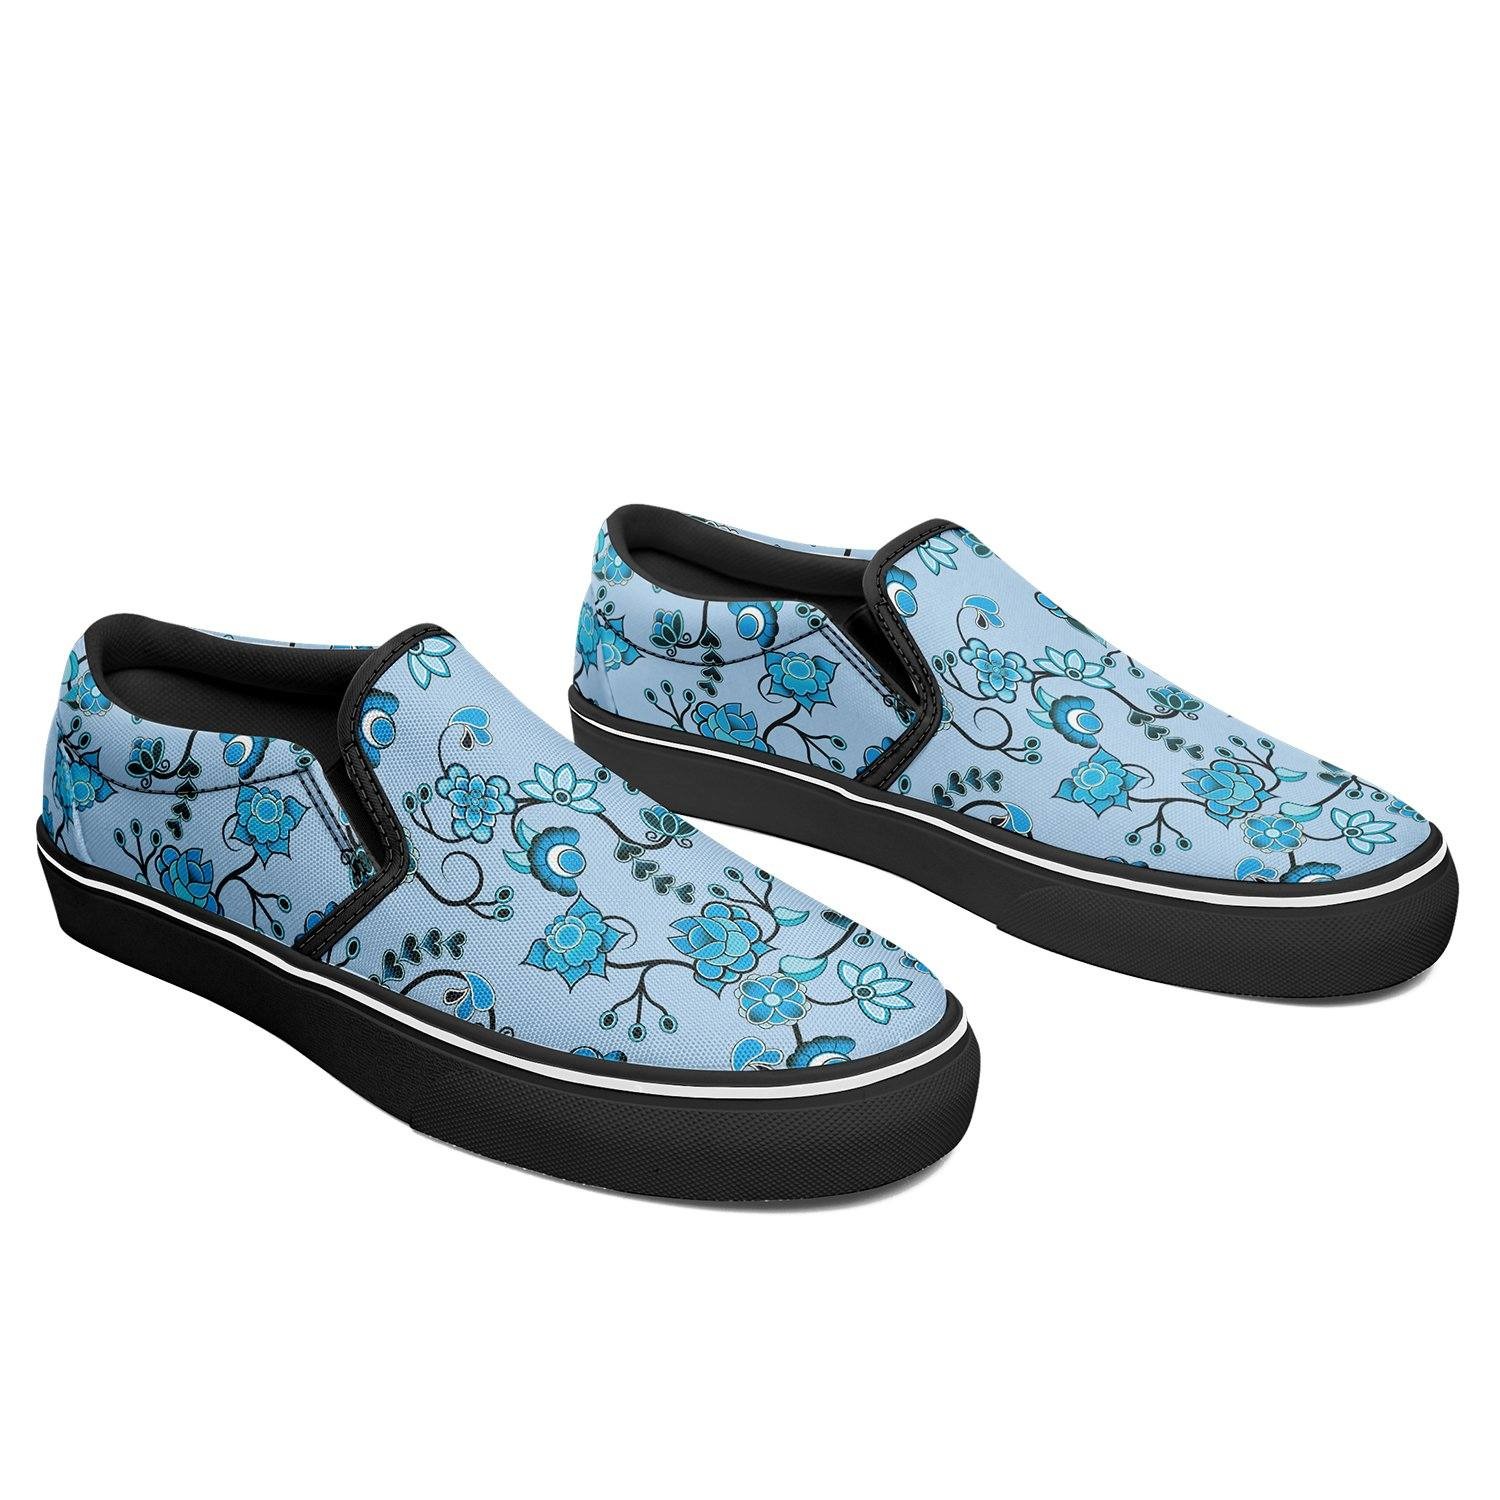 Blue Floral Amour Otoyimm Canvas Slip On Shoes T130921